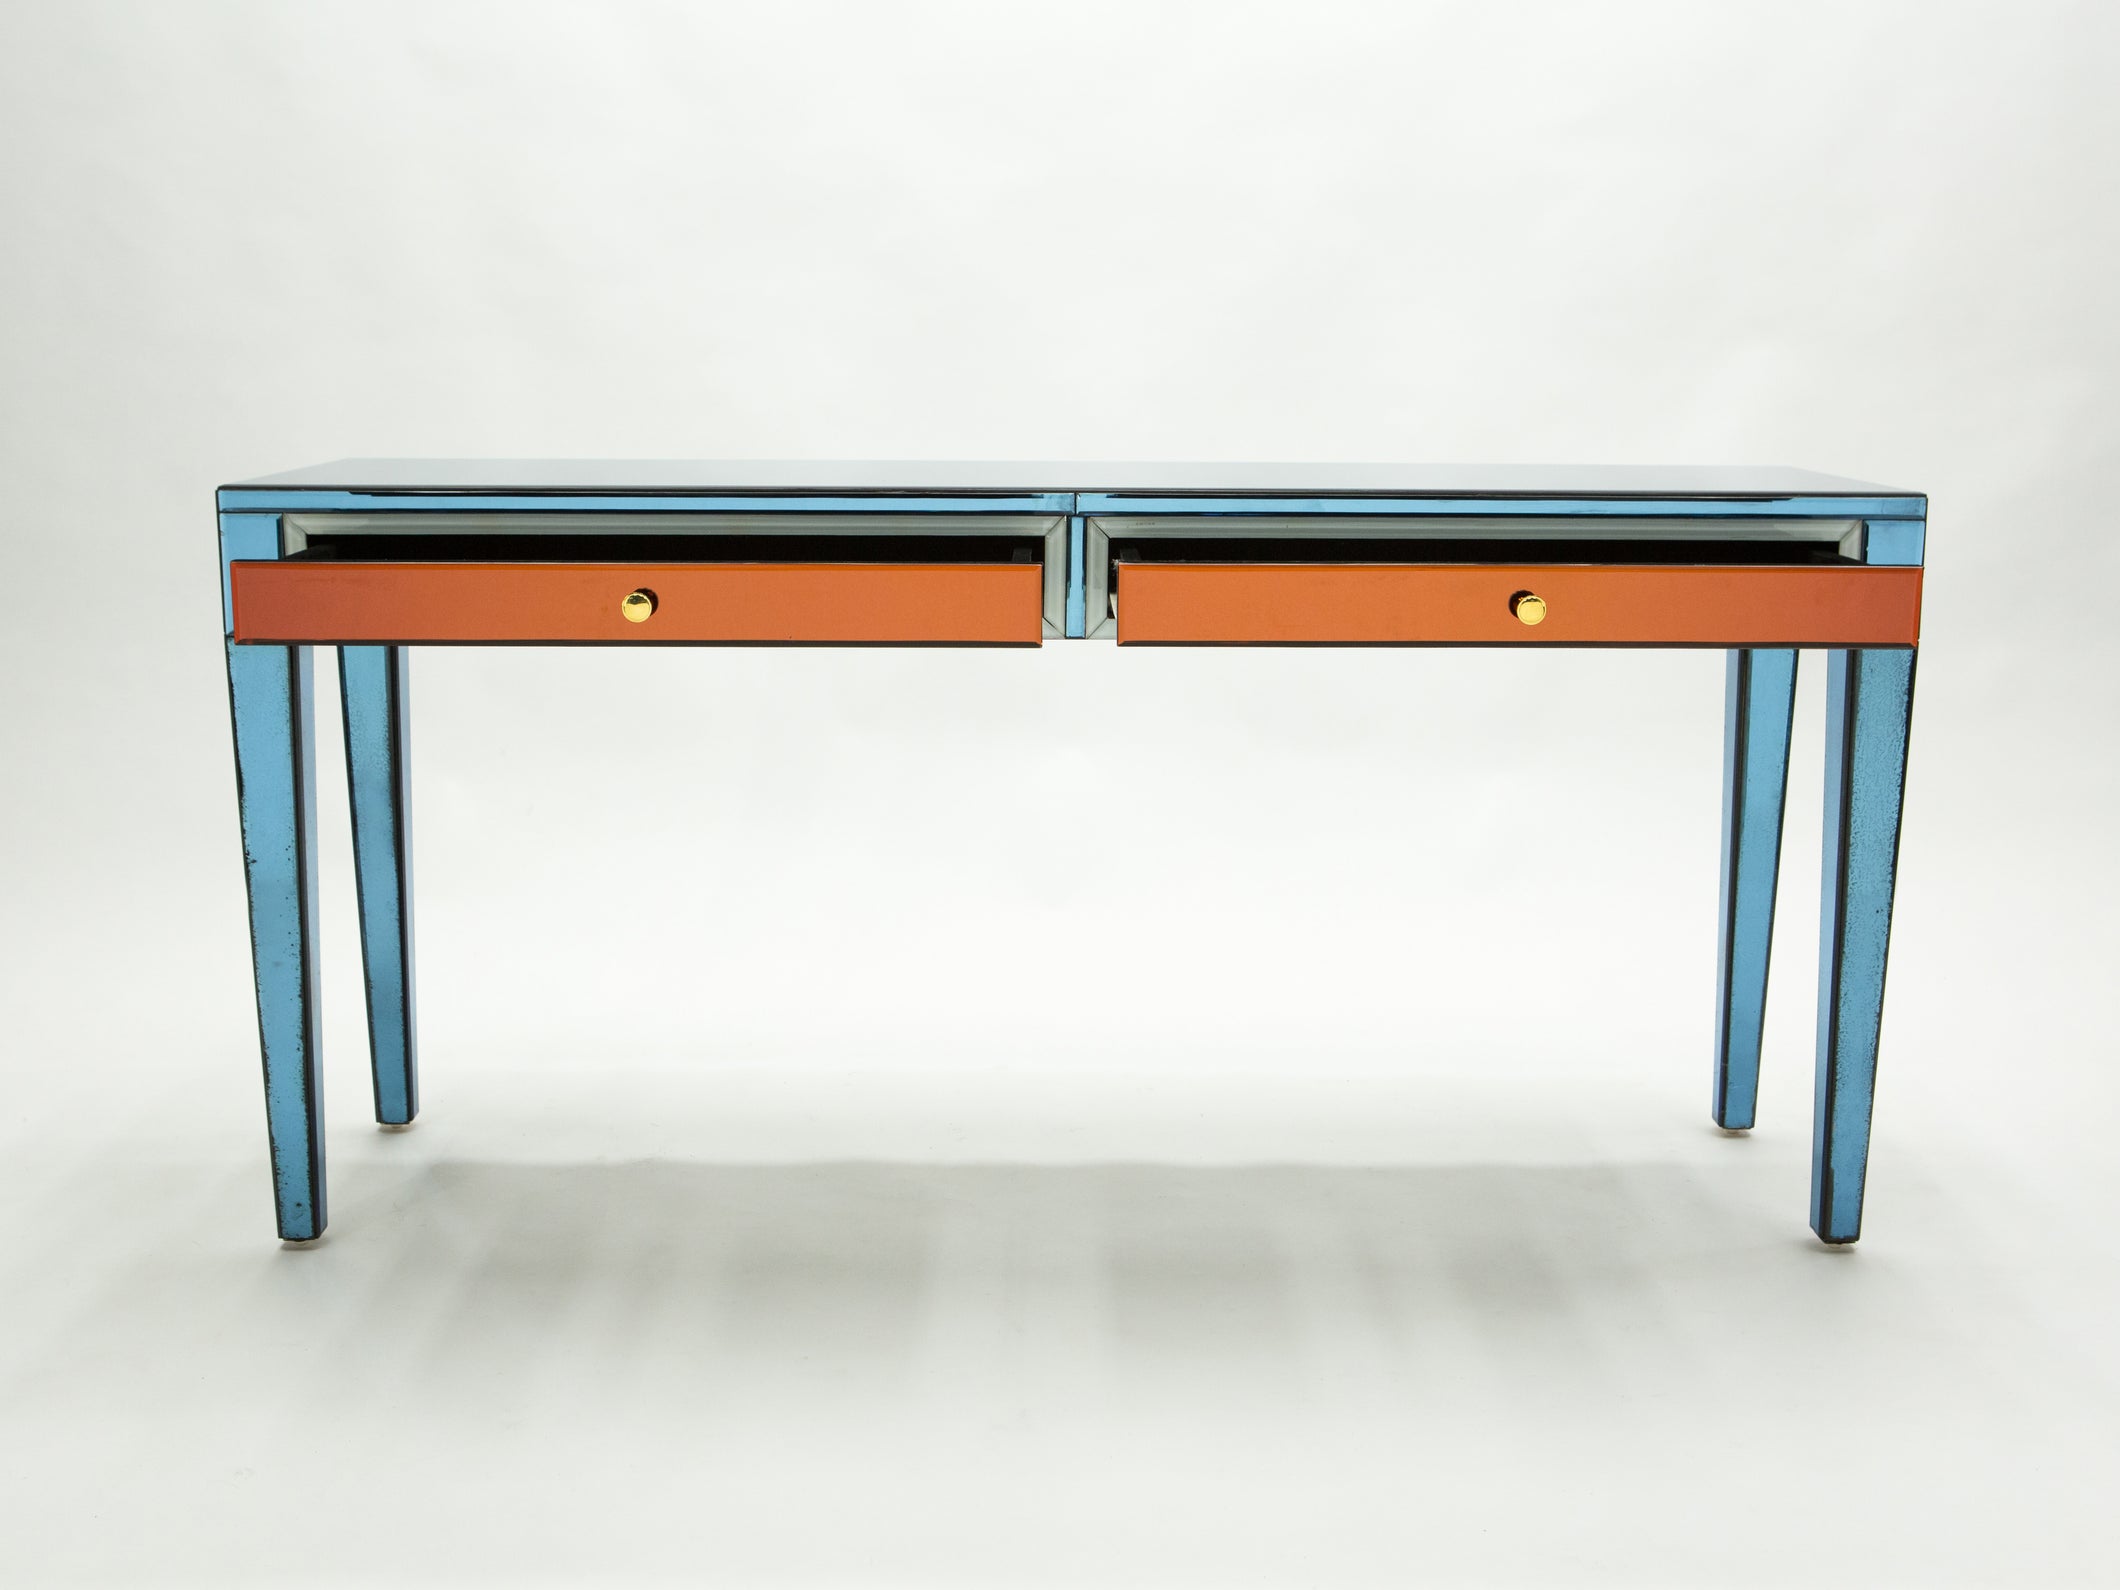 Olivier de Schrijver signed large mirrored console tables 1990s